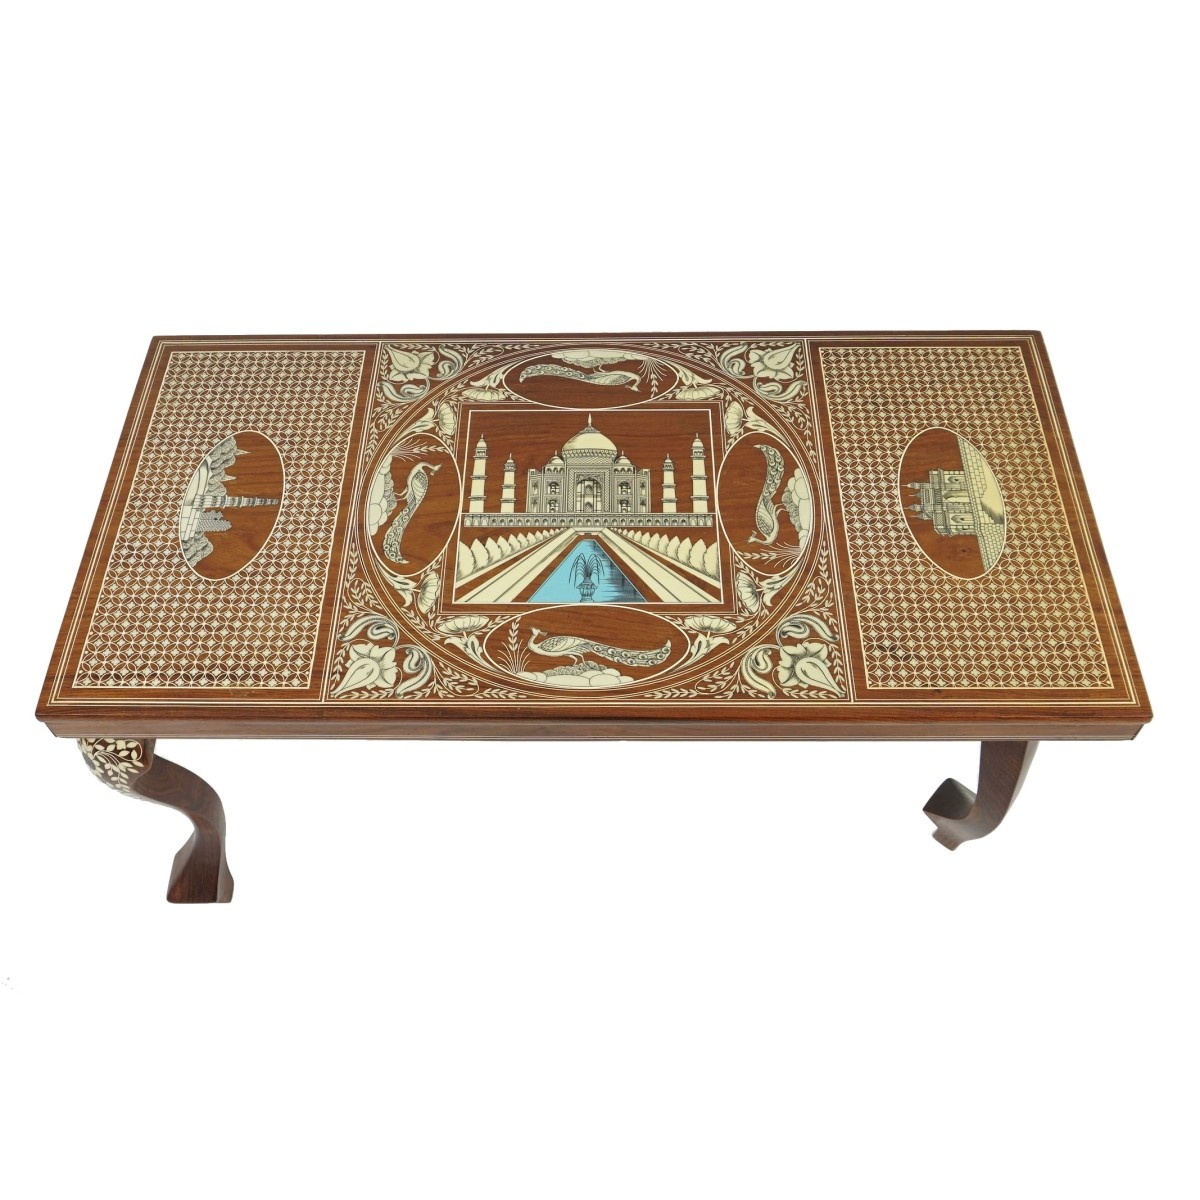 Anglo-Indian Coffee Table